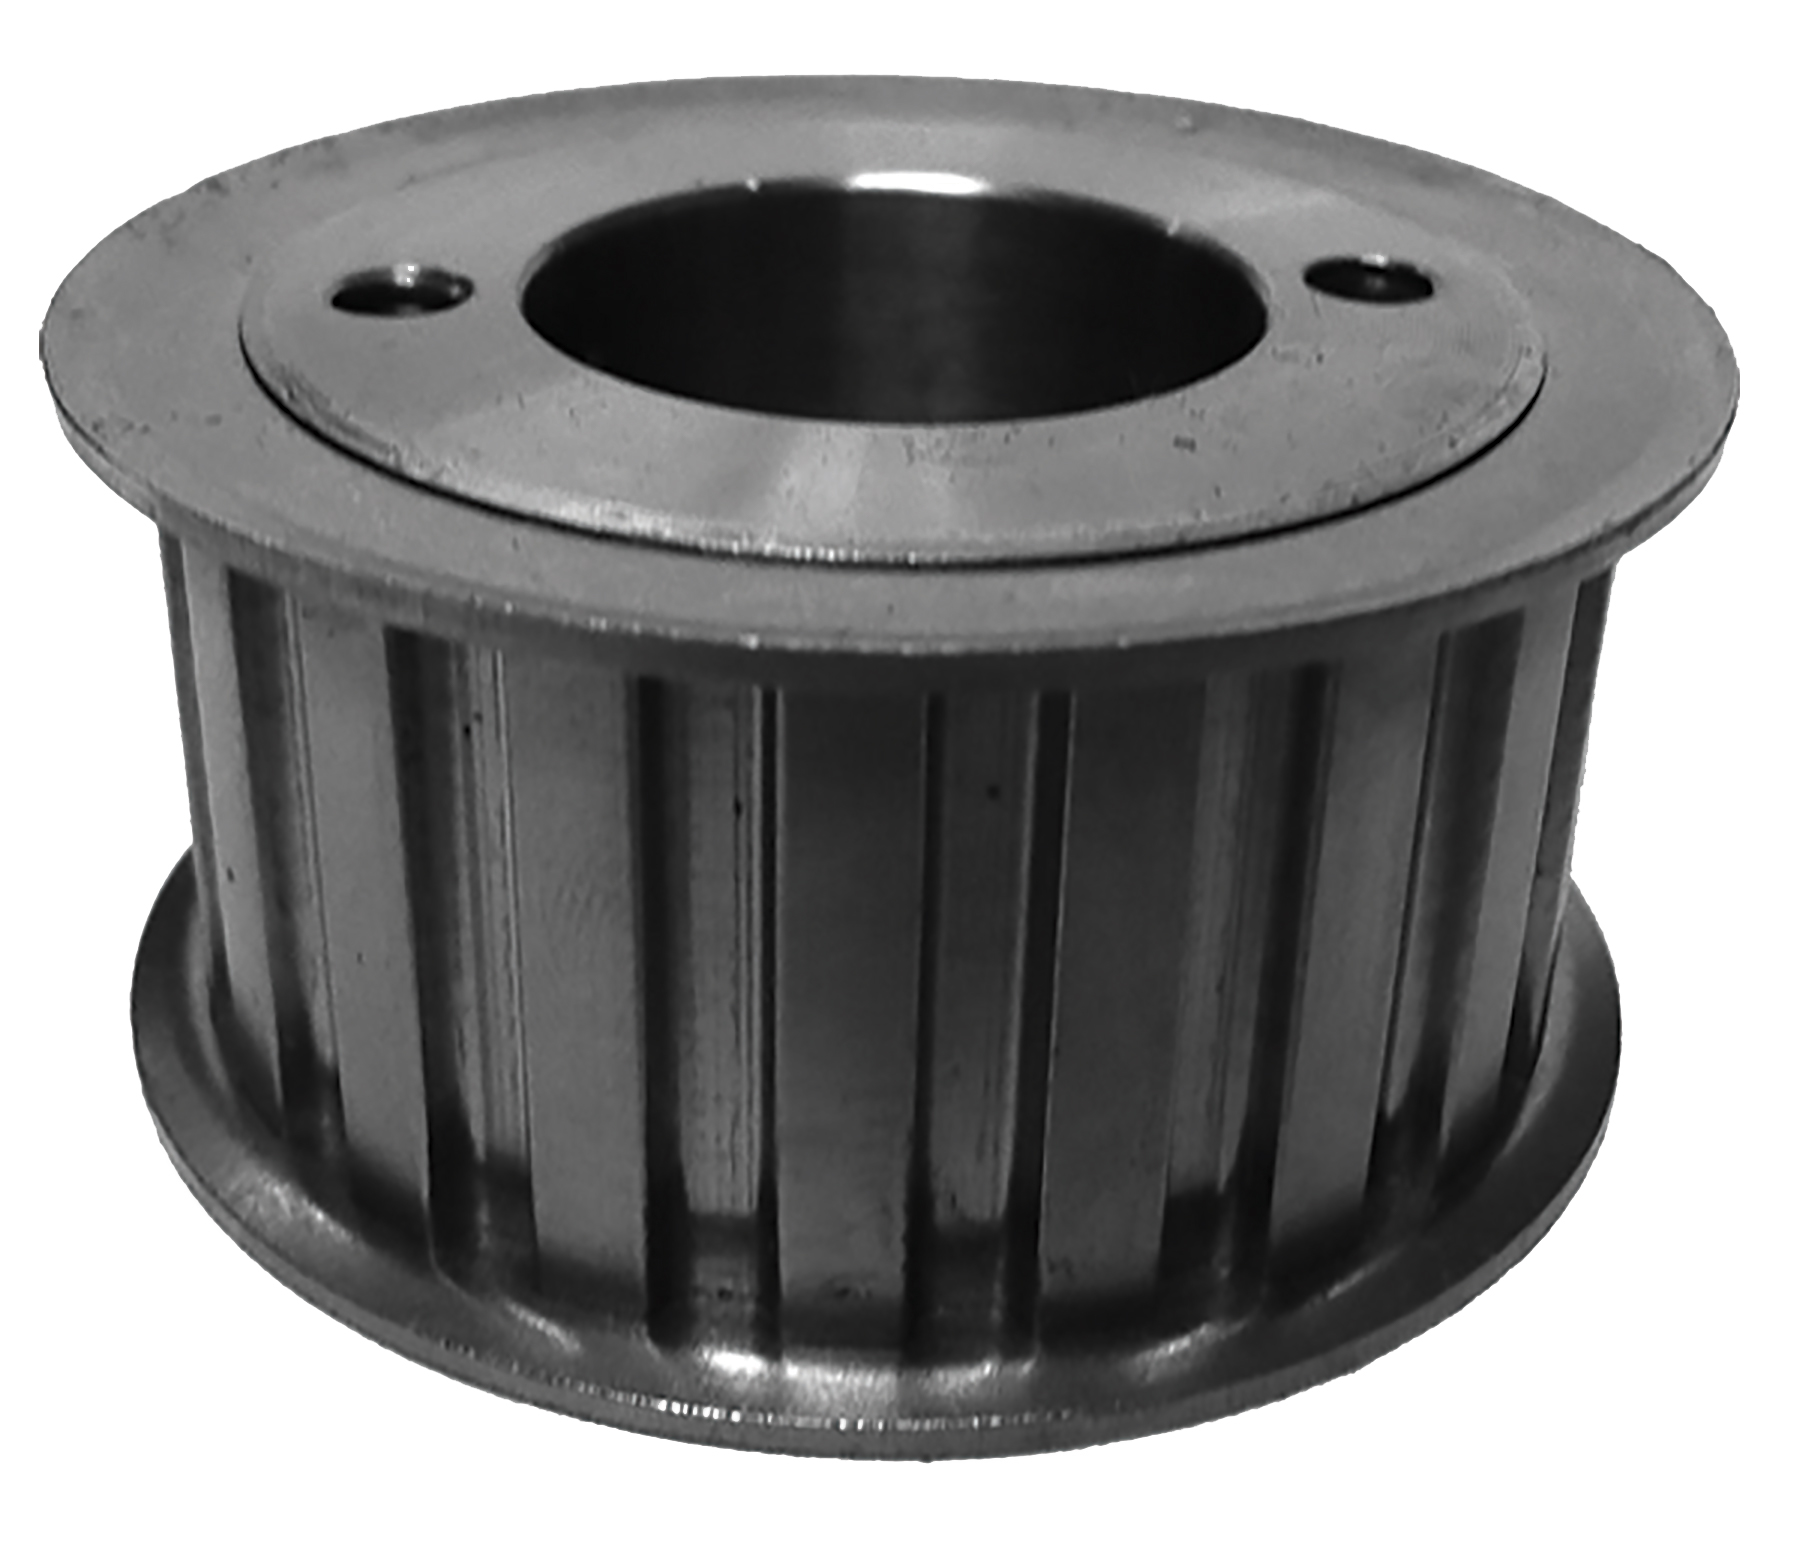 48LP100 - Cast Iron Imperial Pitch Pulleys